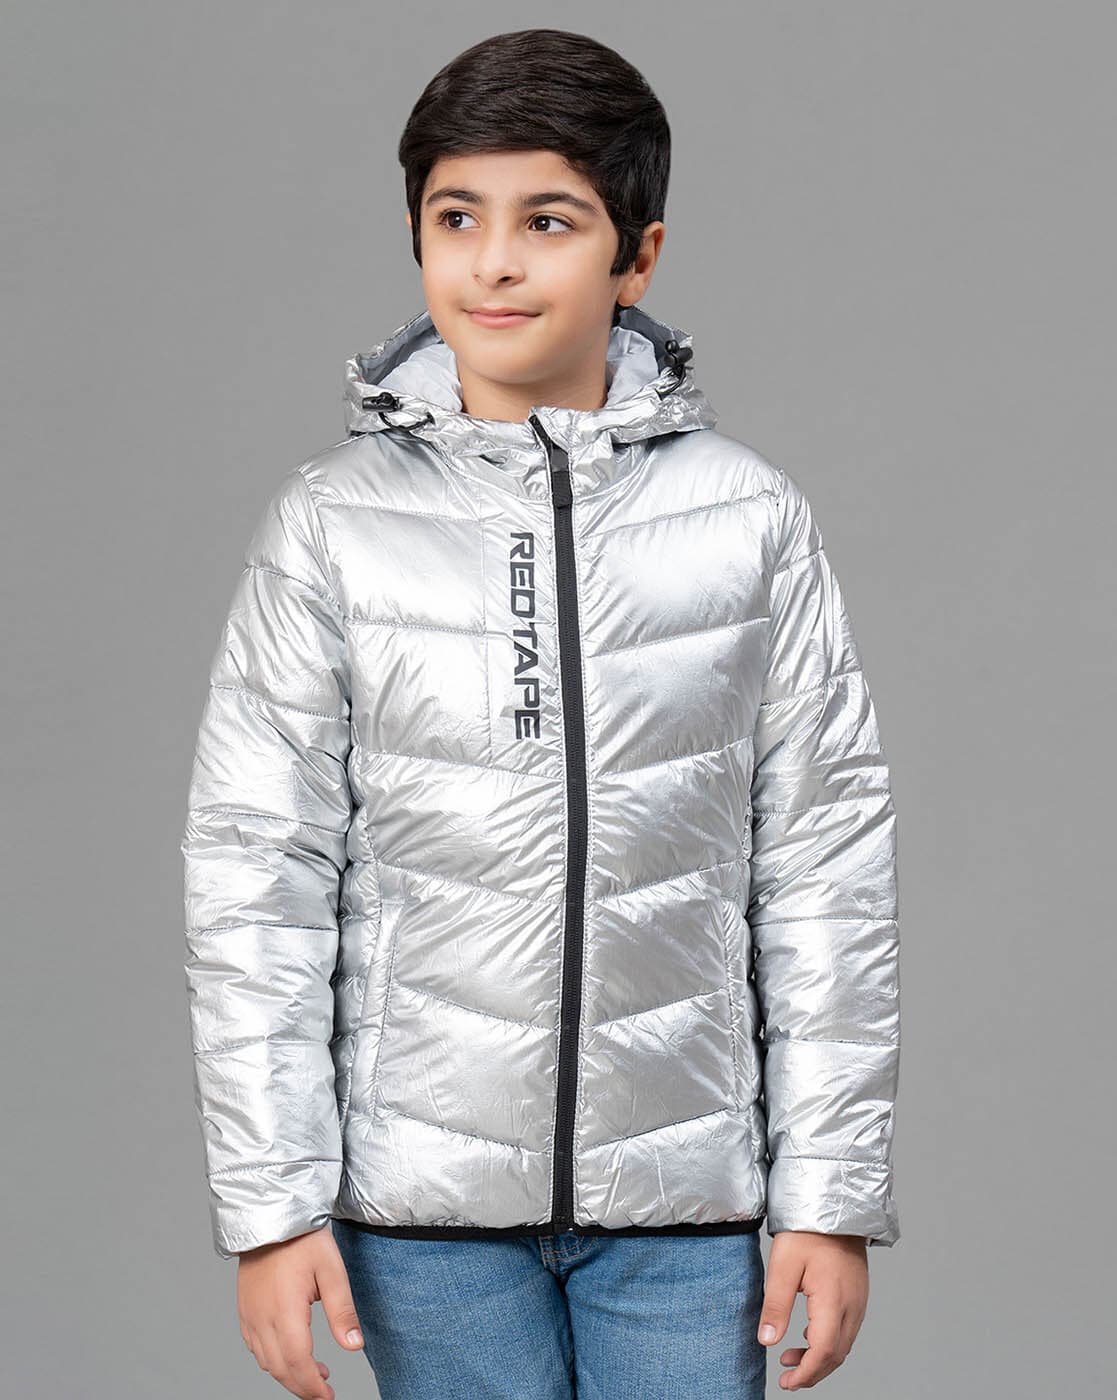 Red Tape boys' jackets & coats, compare prices and buy online